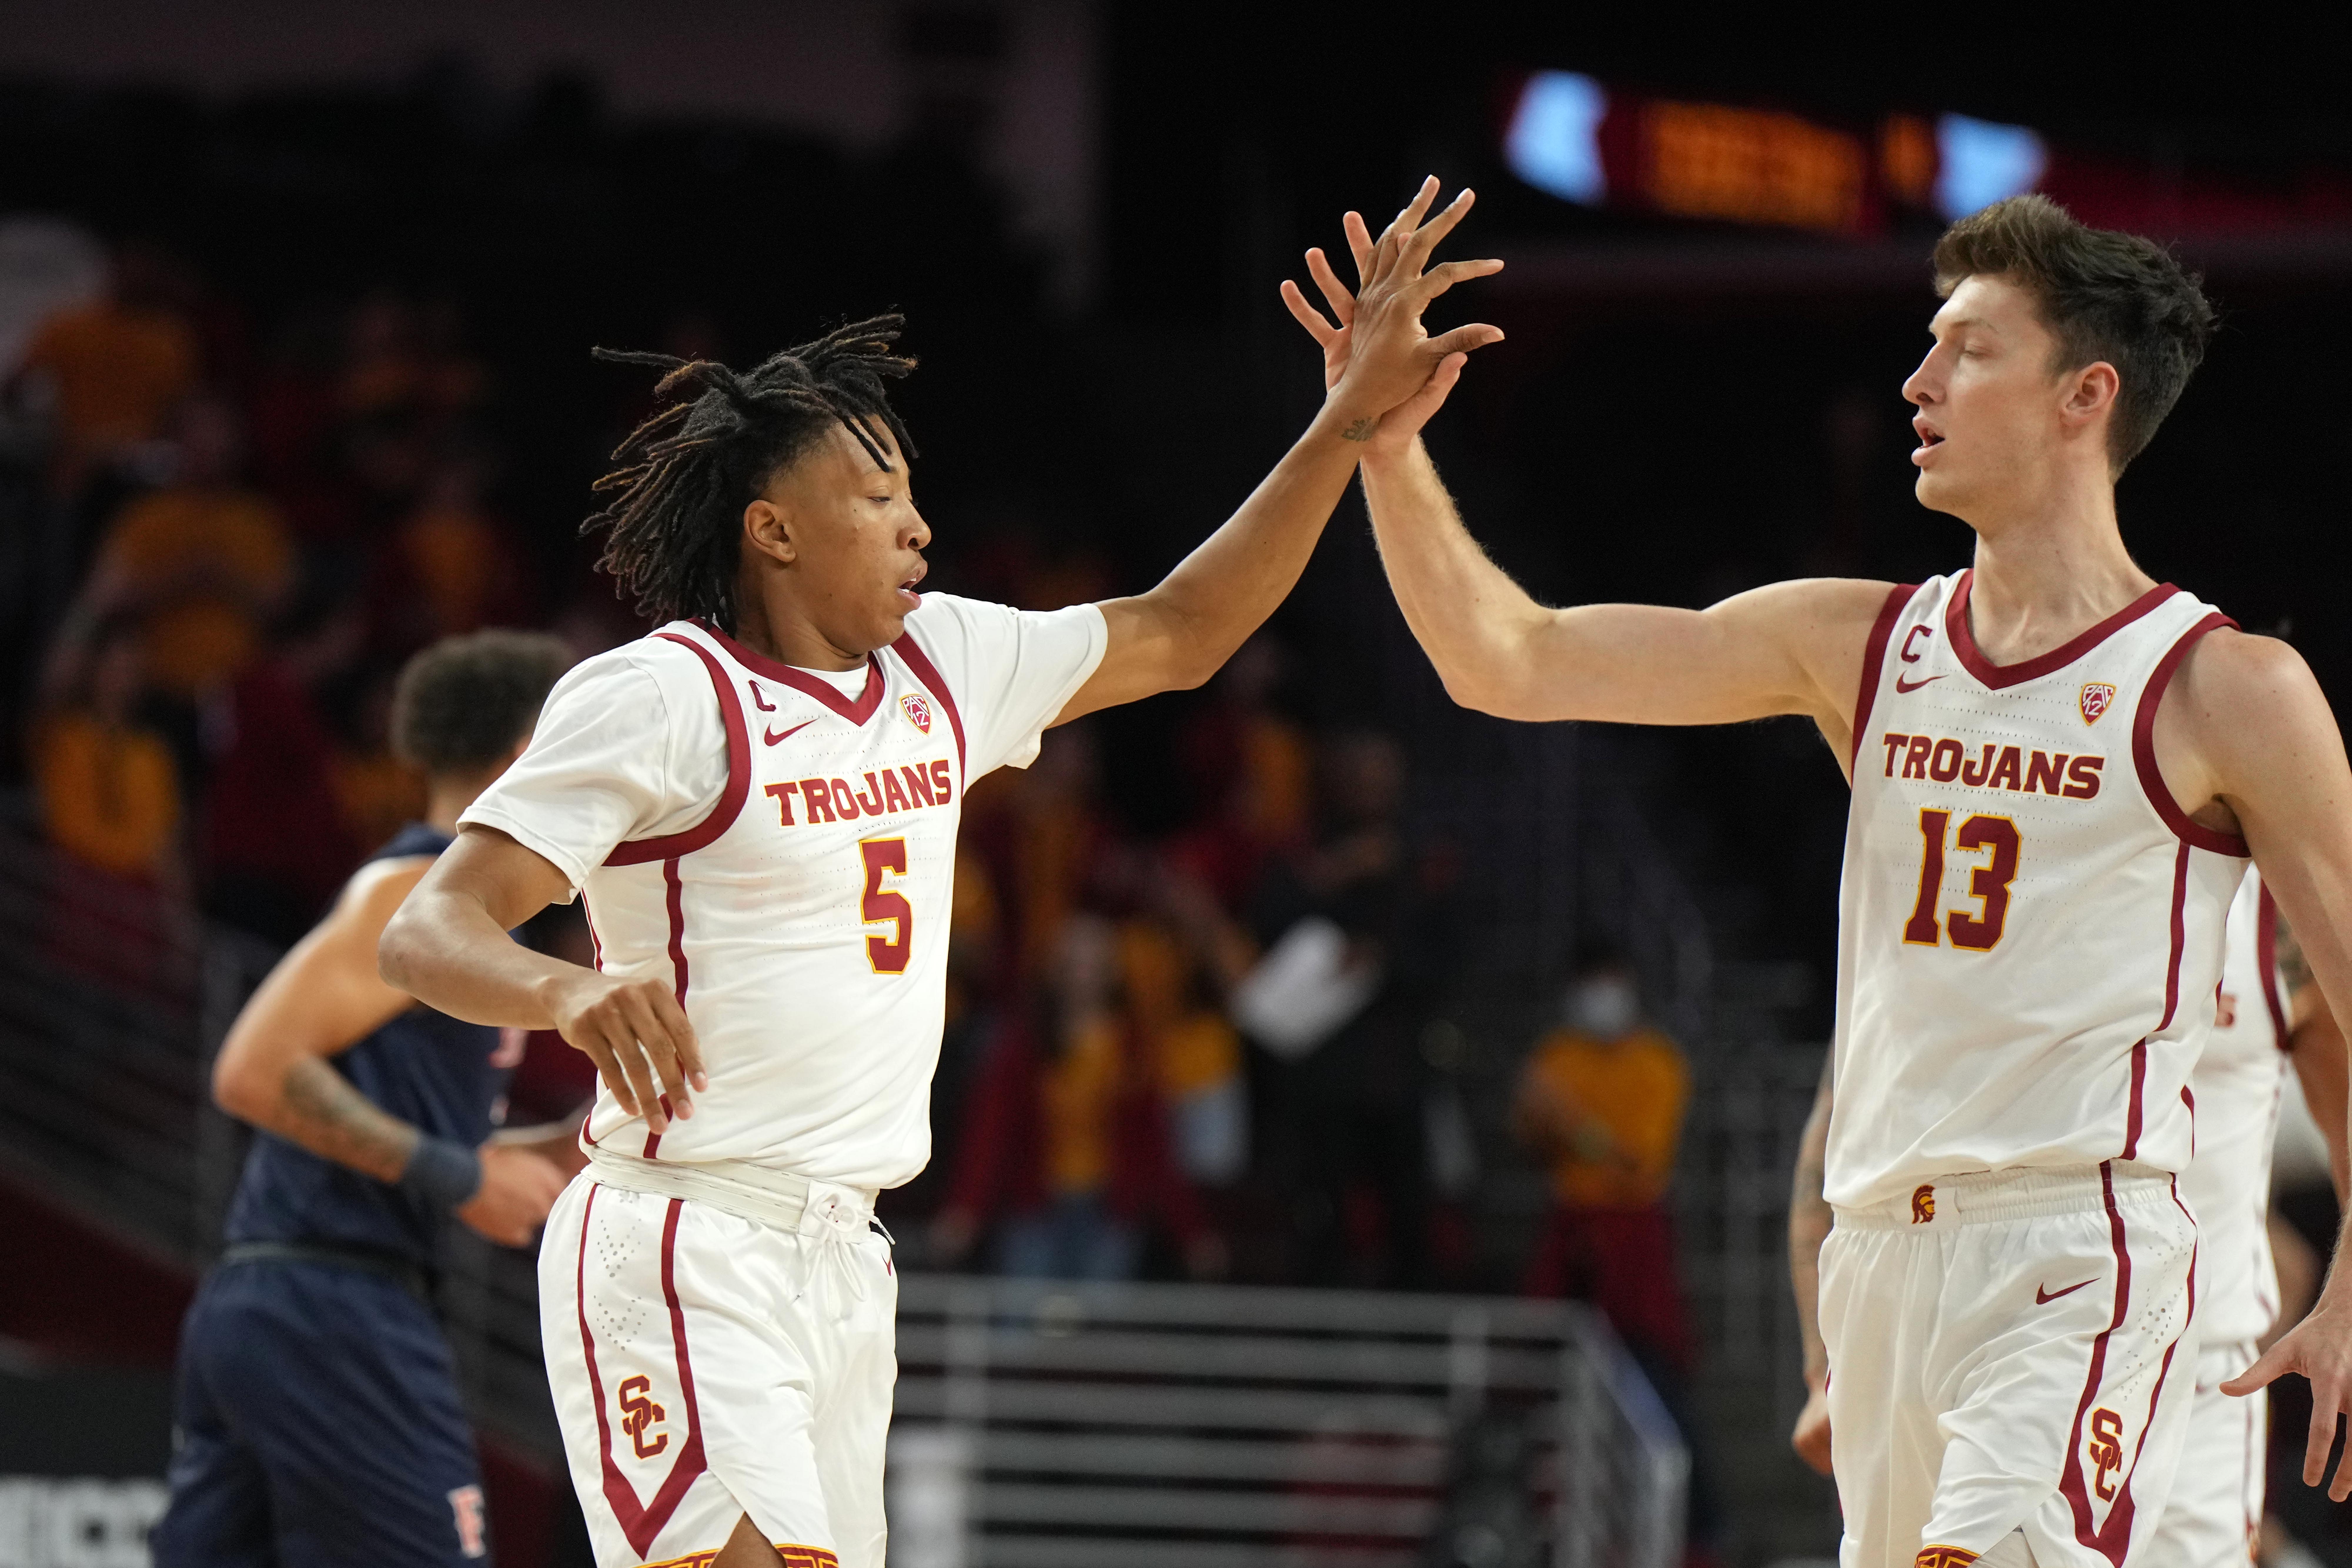 Does USC have a tough or easy NCAA Tournament region? It doesn’t matter